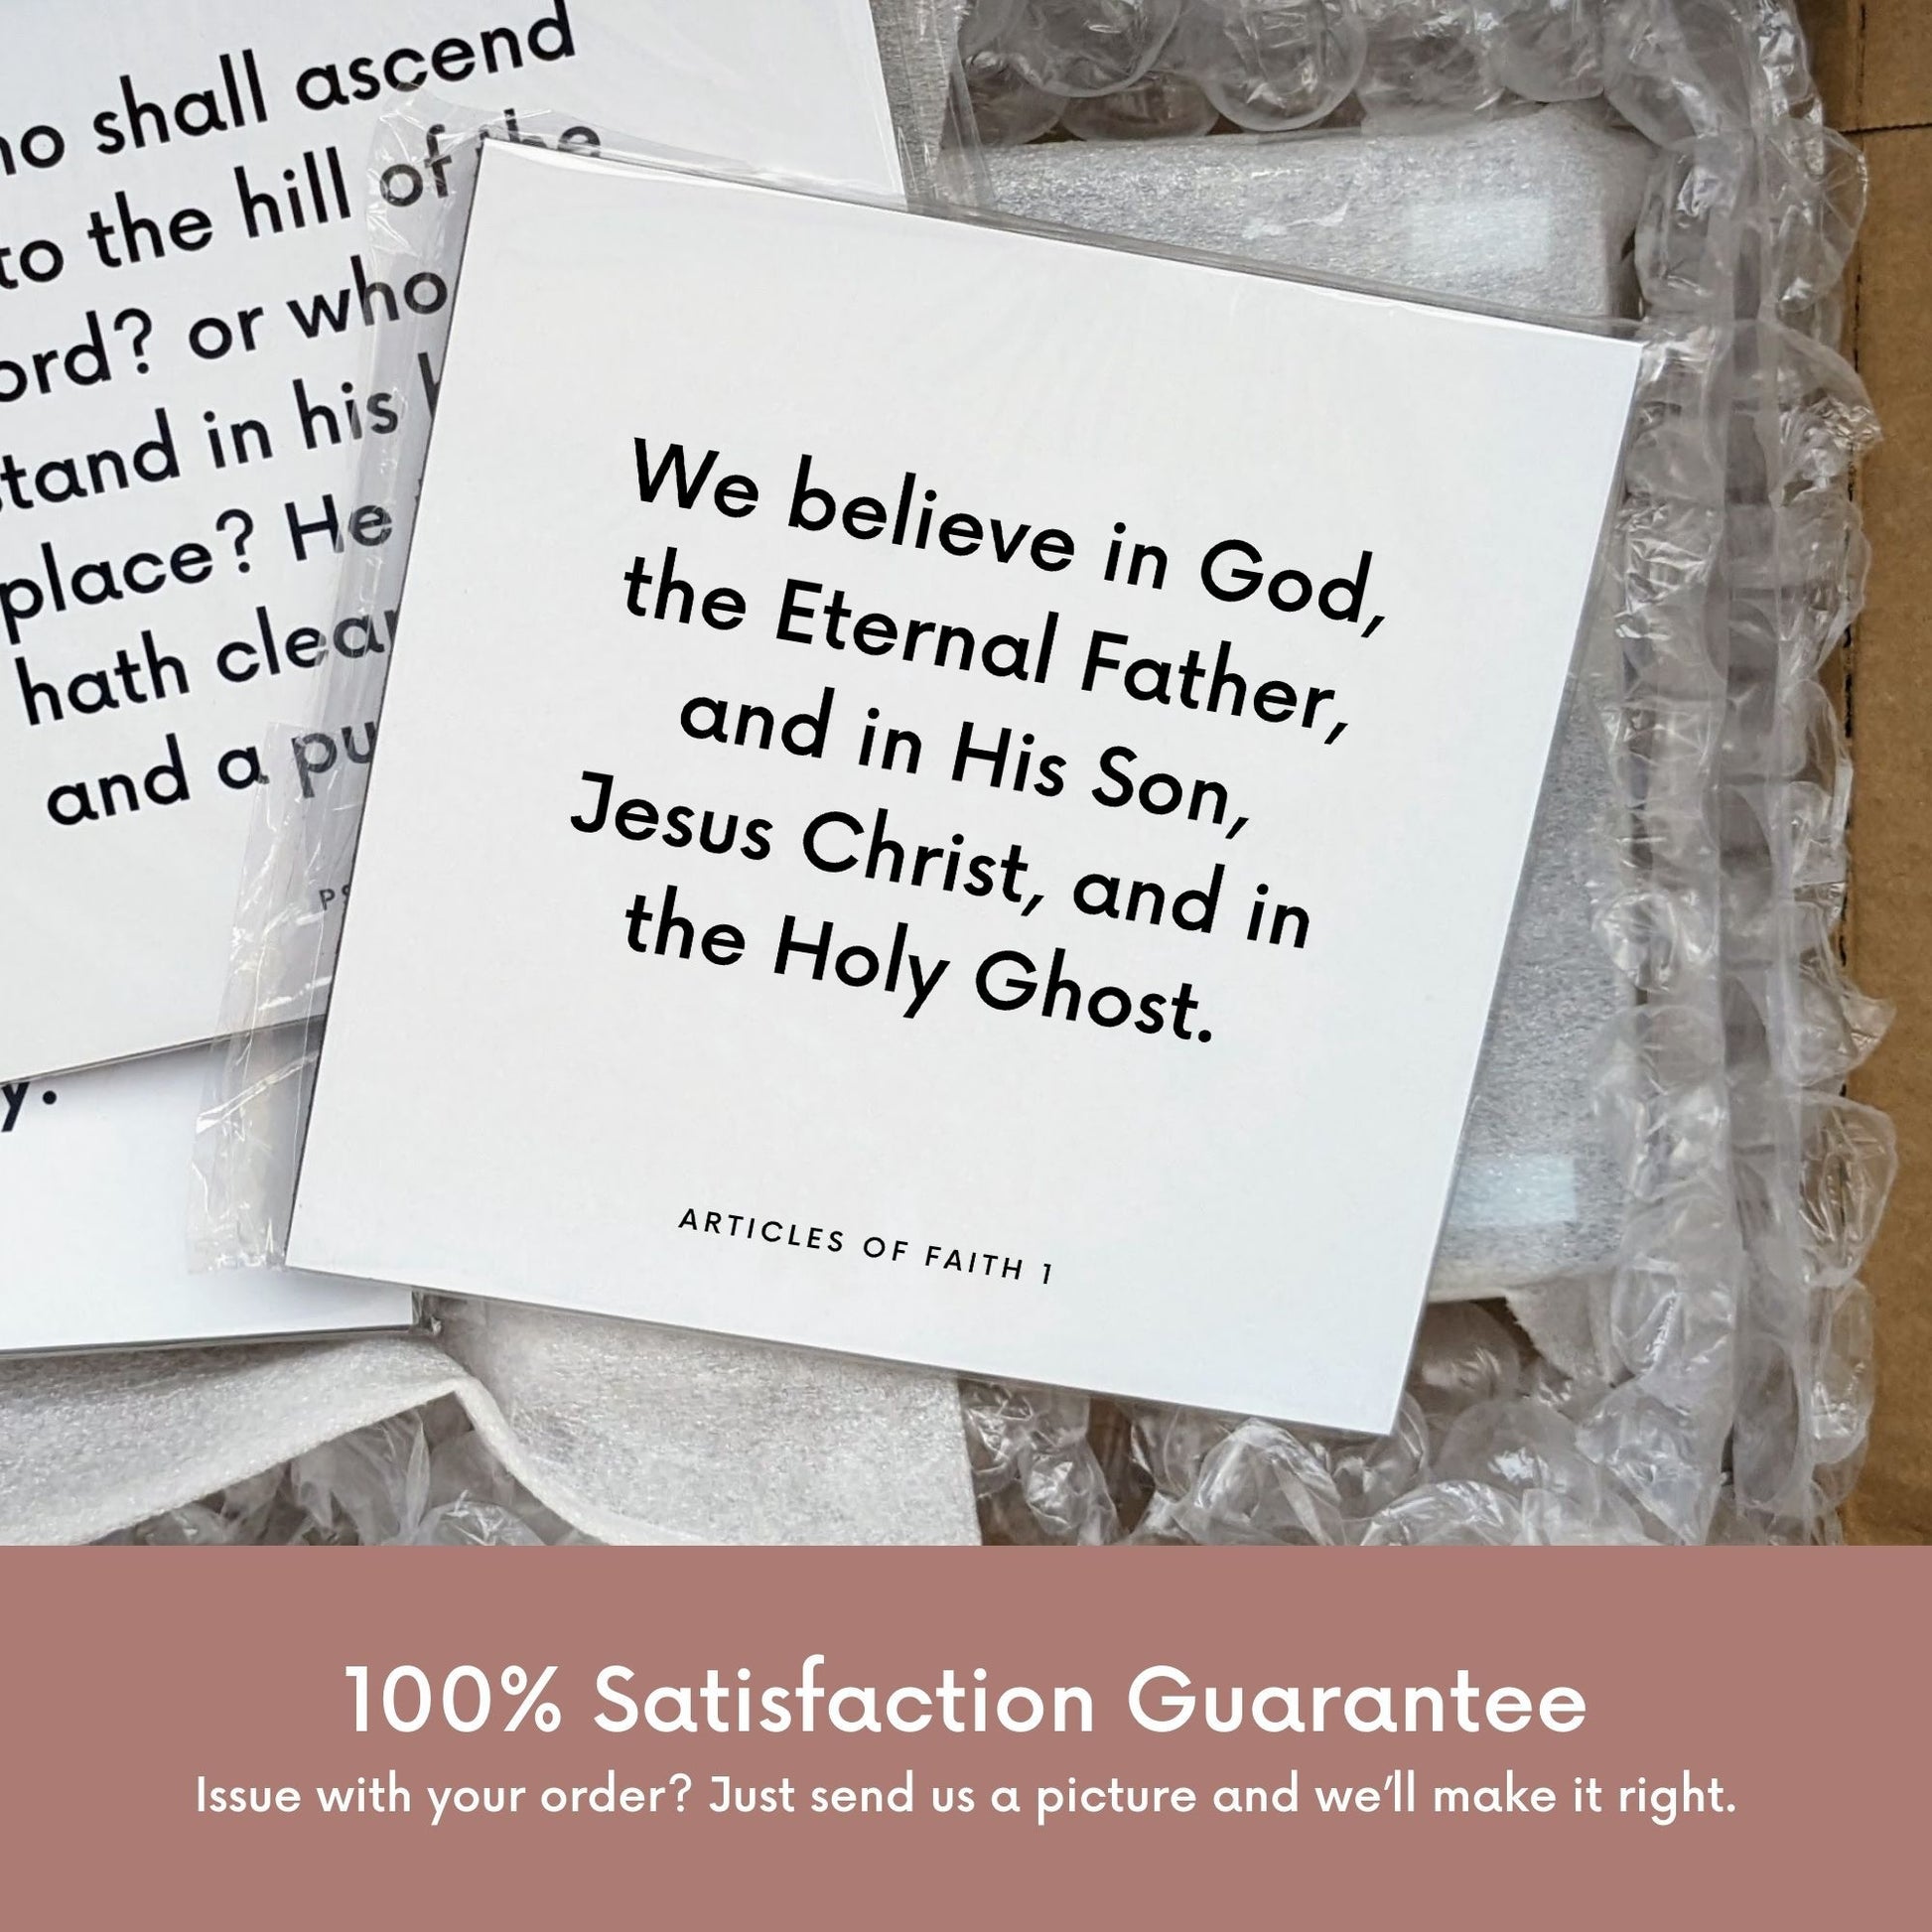 Shipping materials for scripture tile of Articles of Faith 1 - "We believe in God, the Eternal Father"